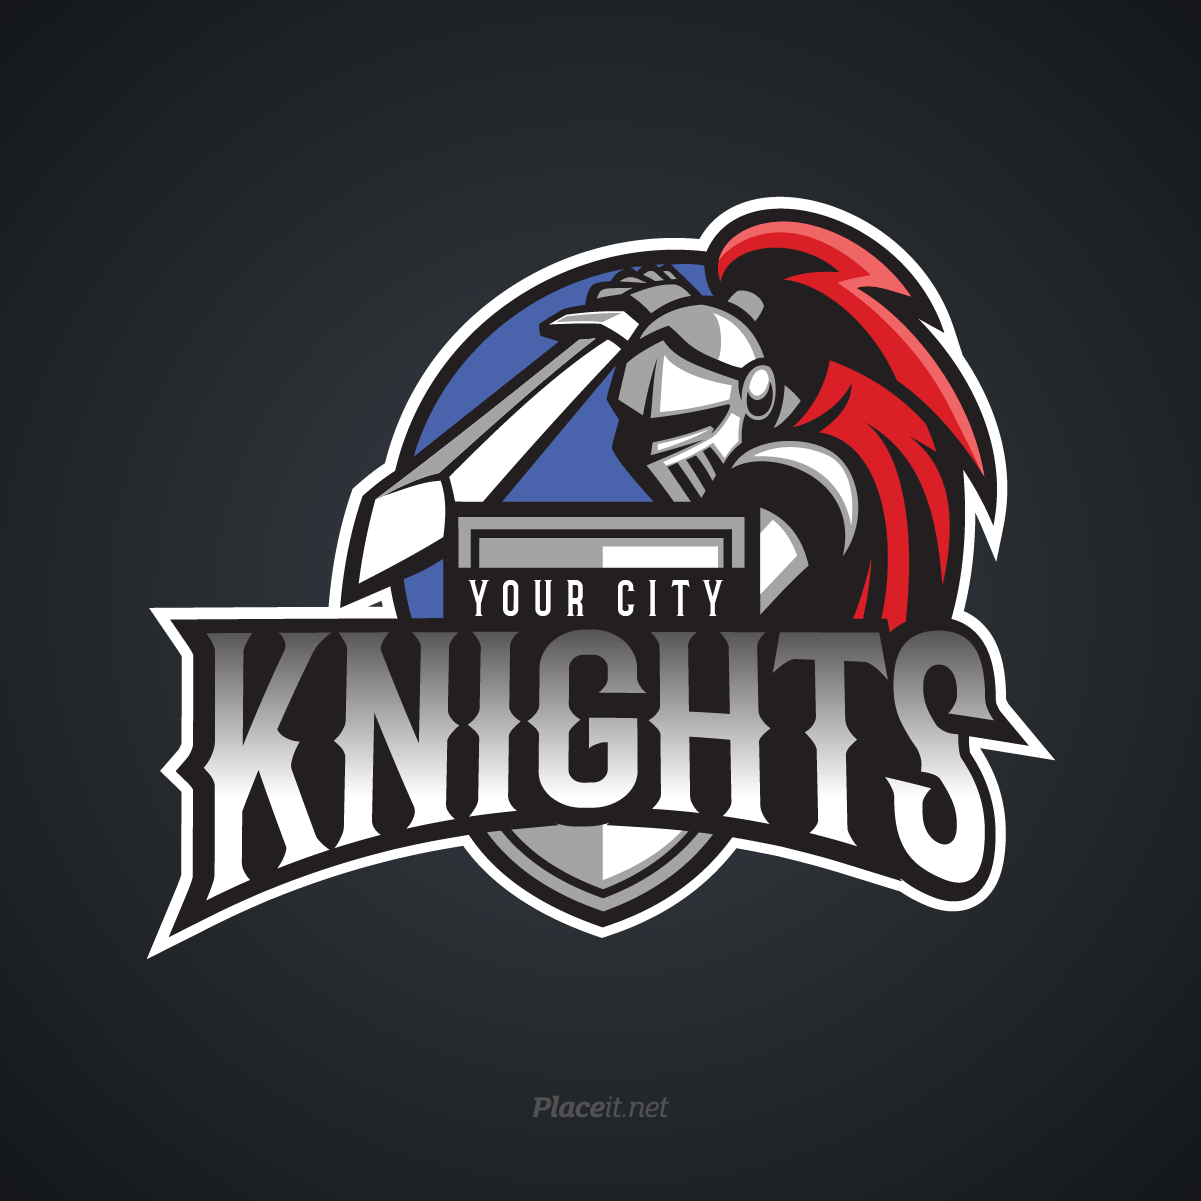 Knights Sports Logo - Dribbble - knights_sports_logo.png by Placeit